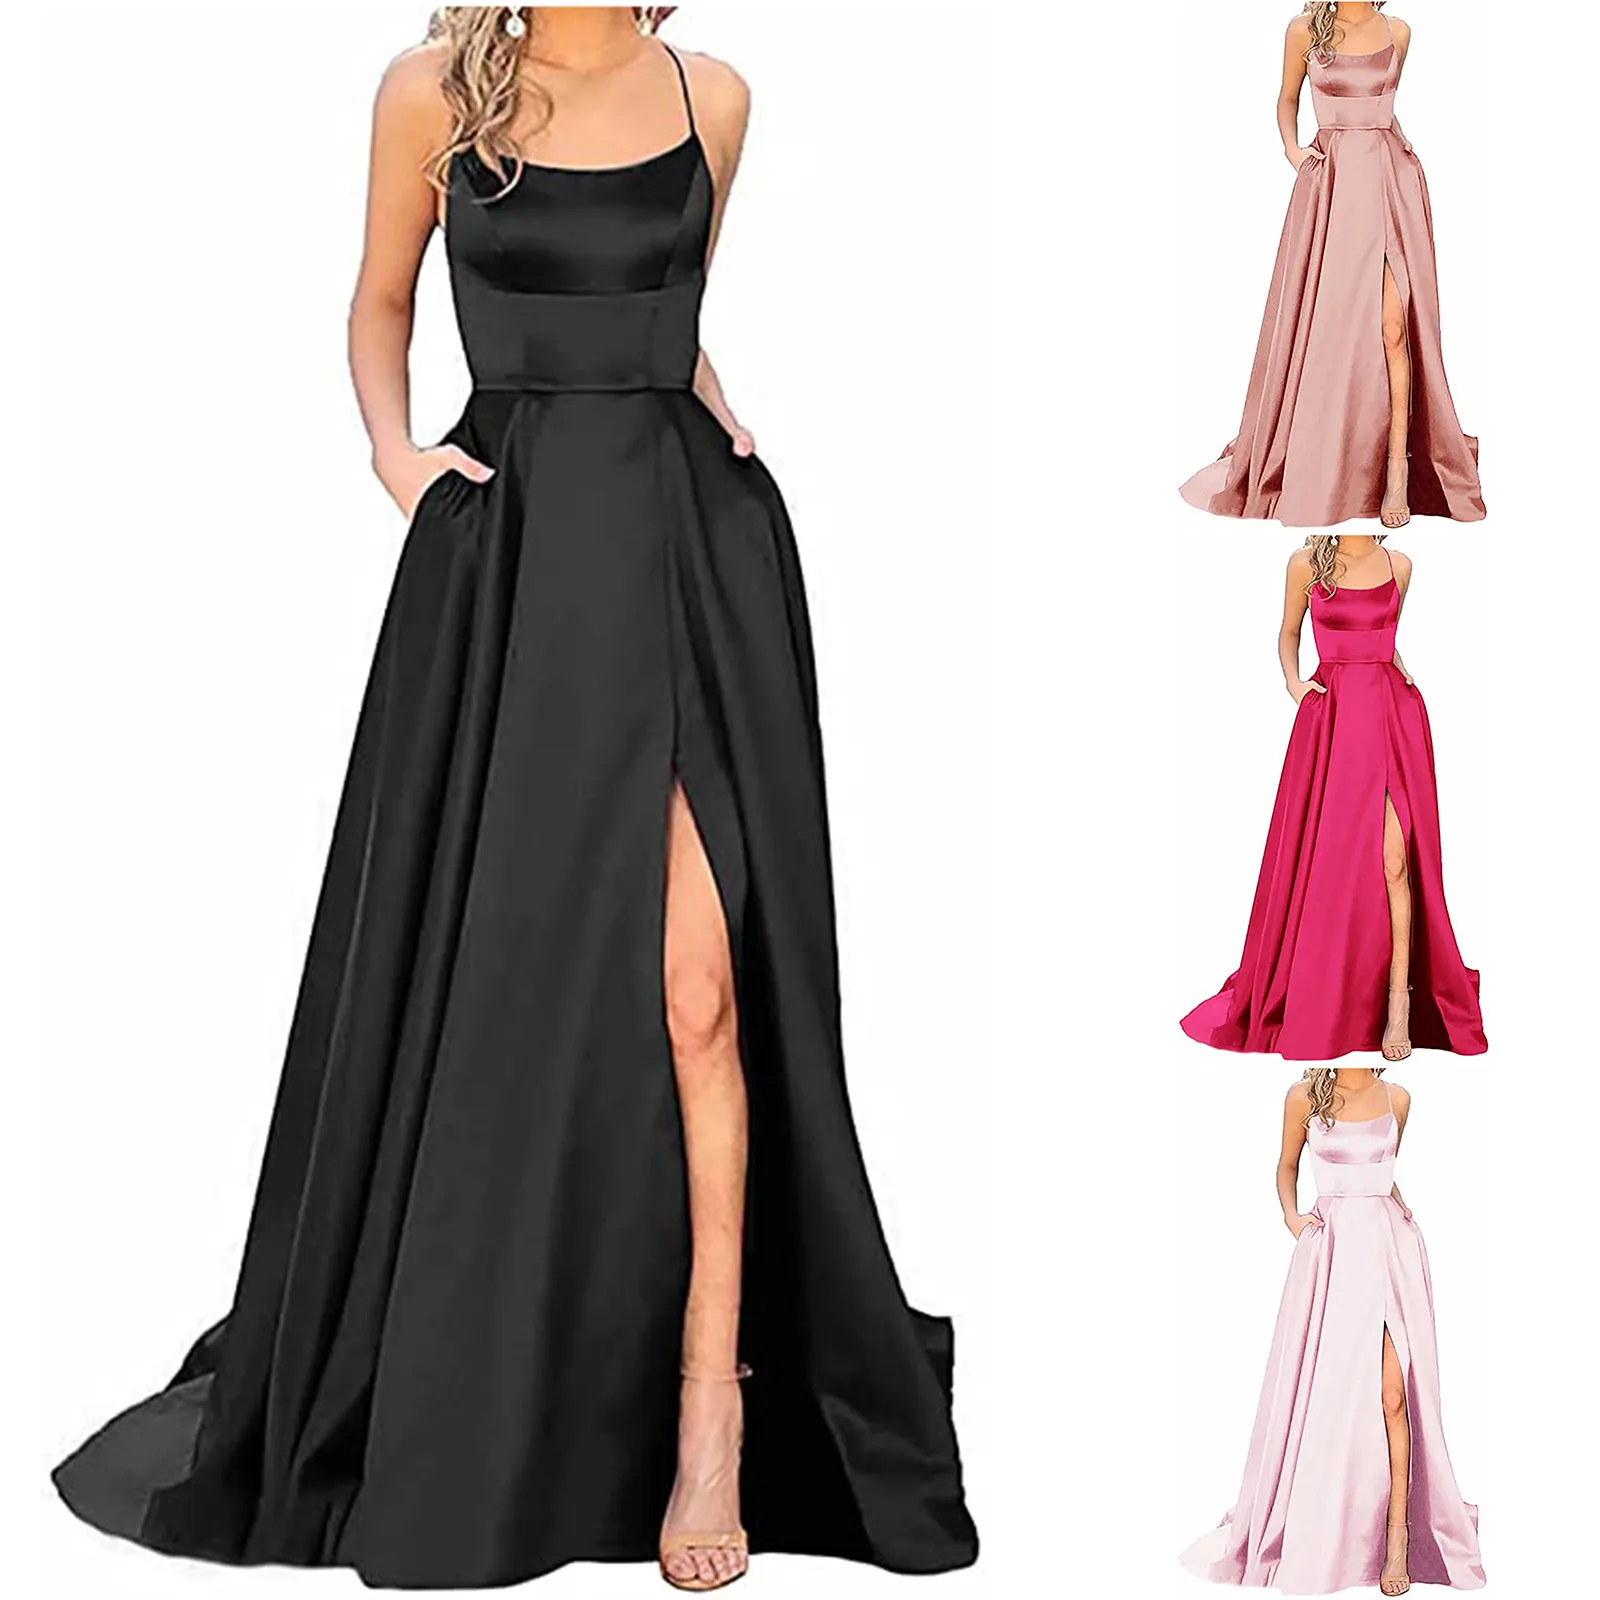 

Elegant Simple Bridesmaid Long Dress For Women New Sexy Side Slit Backless Gown Maxi Satin Spaghetti Strap Wedding Party Dress